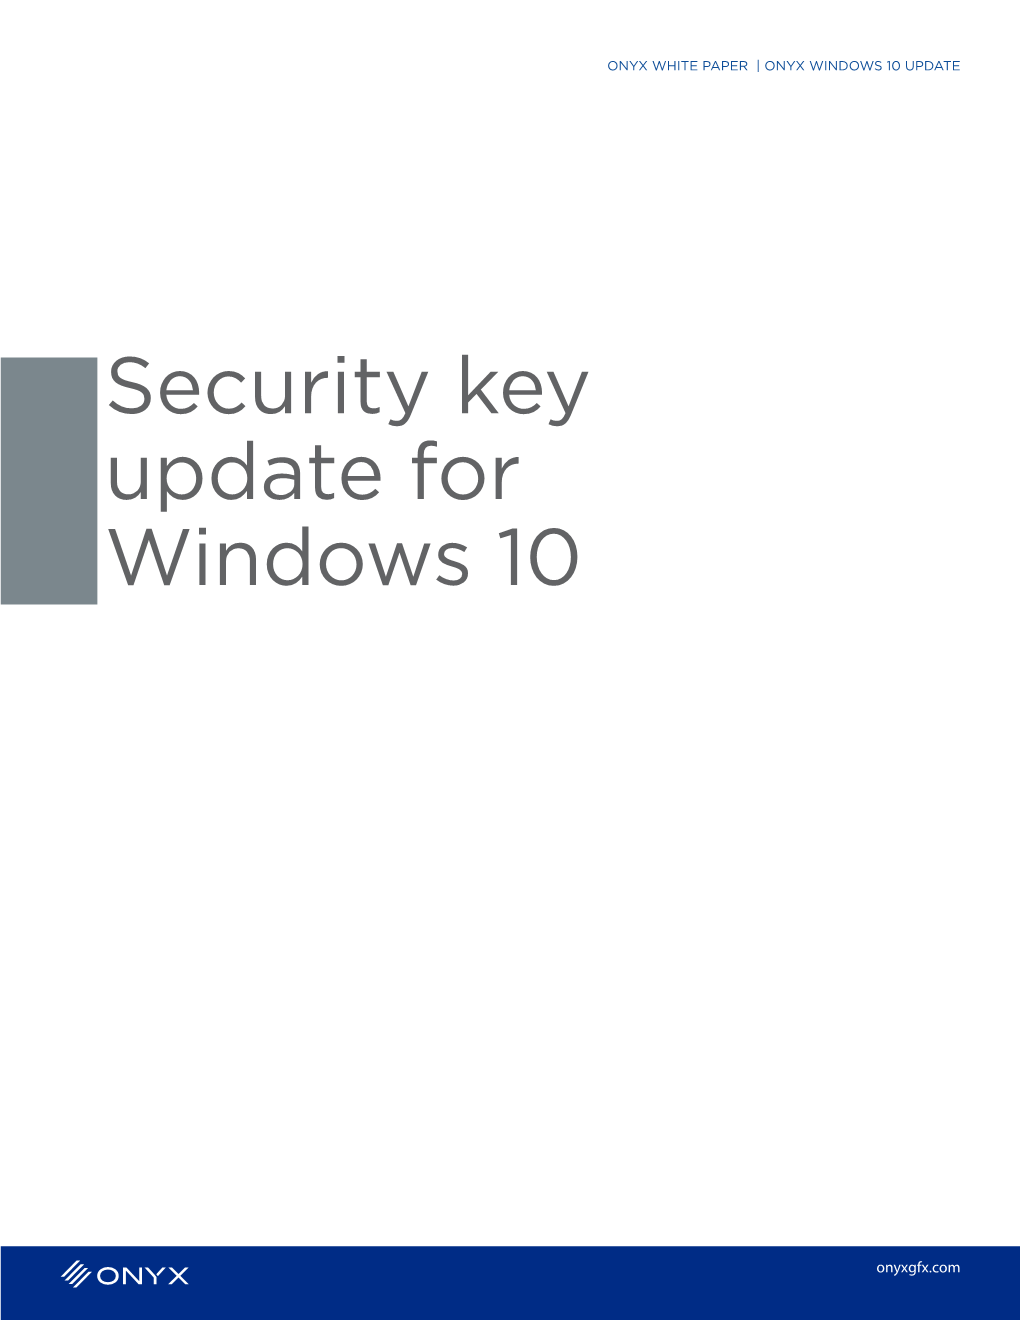 Security Key Update for Windows 10